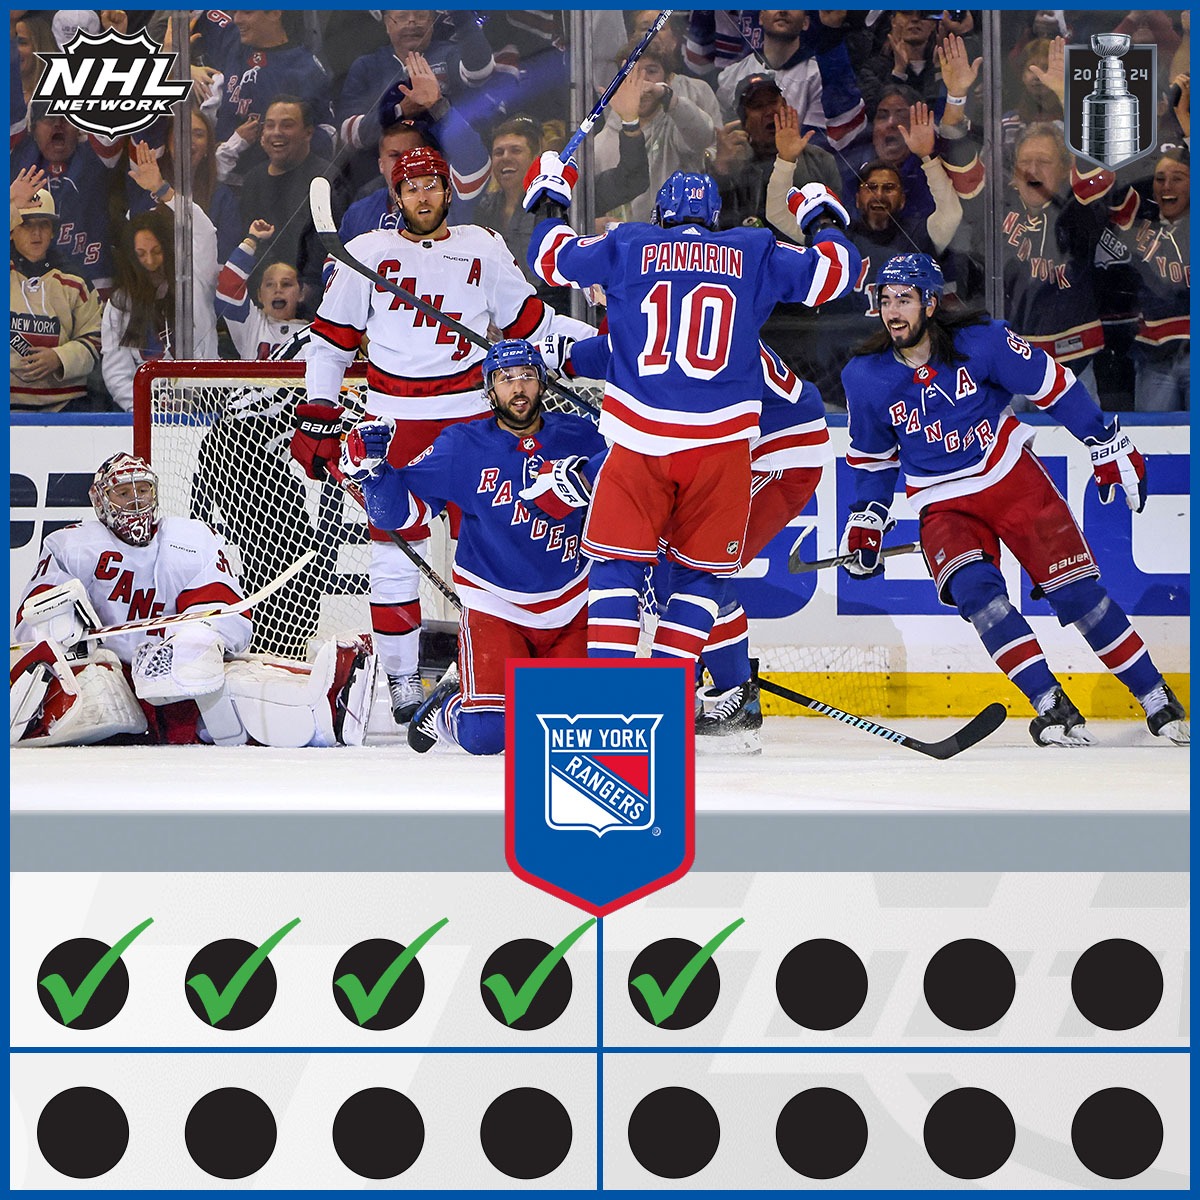 That's five straight wins to start the #StanleyCup Playoffs for the @NYRangers! #NYR